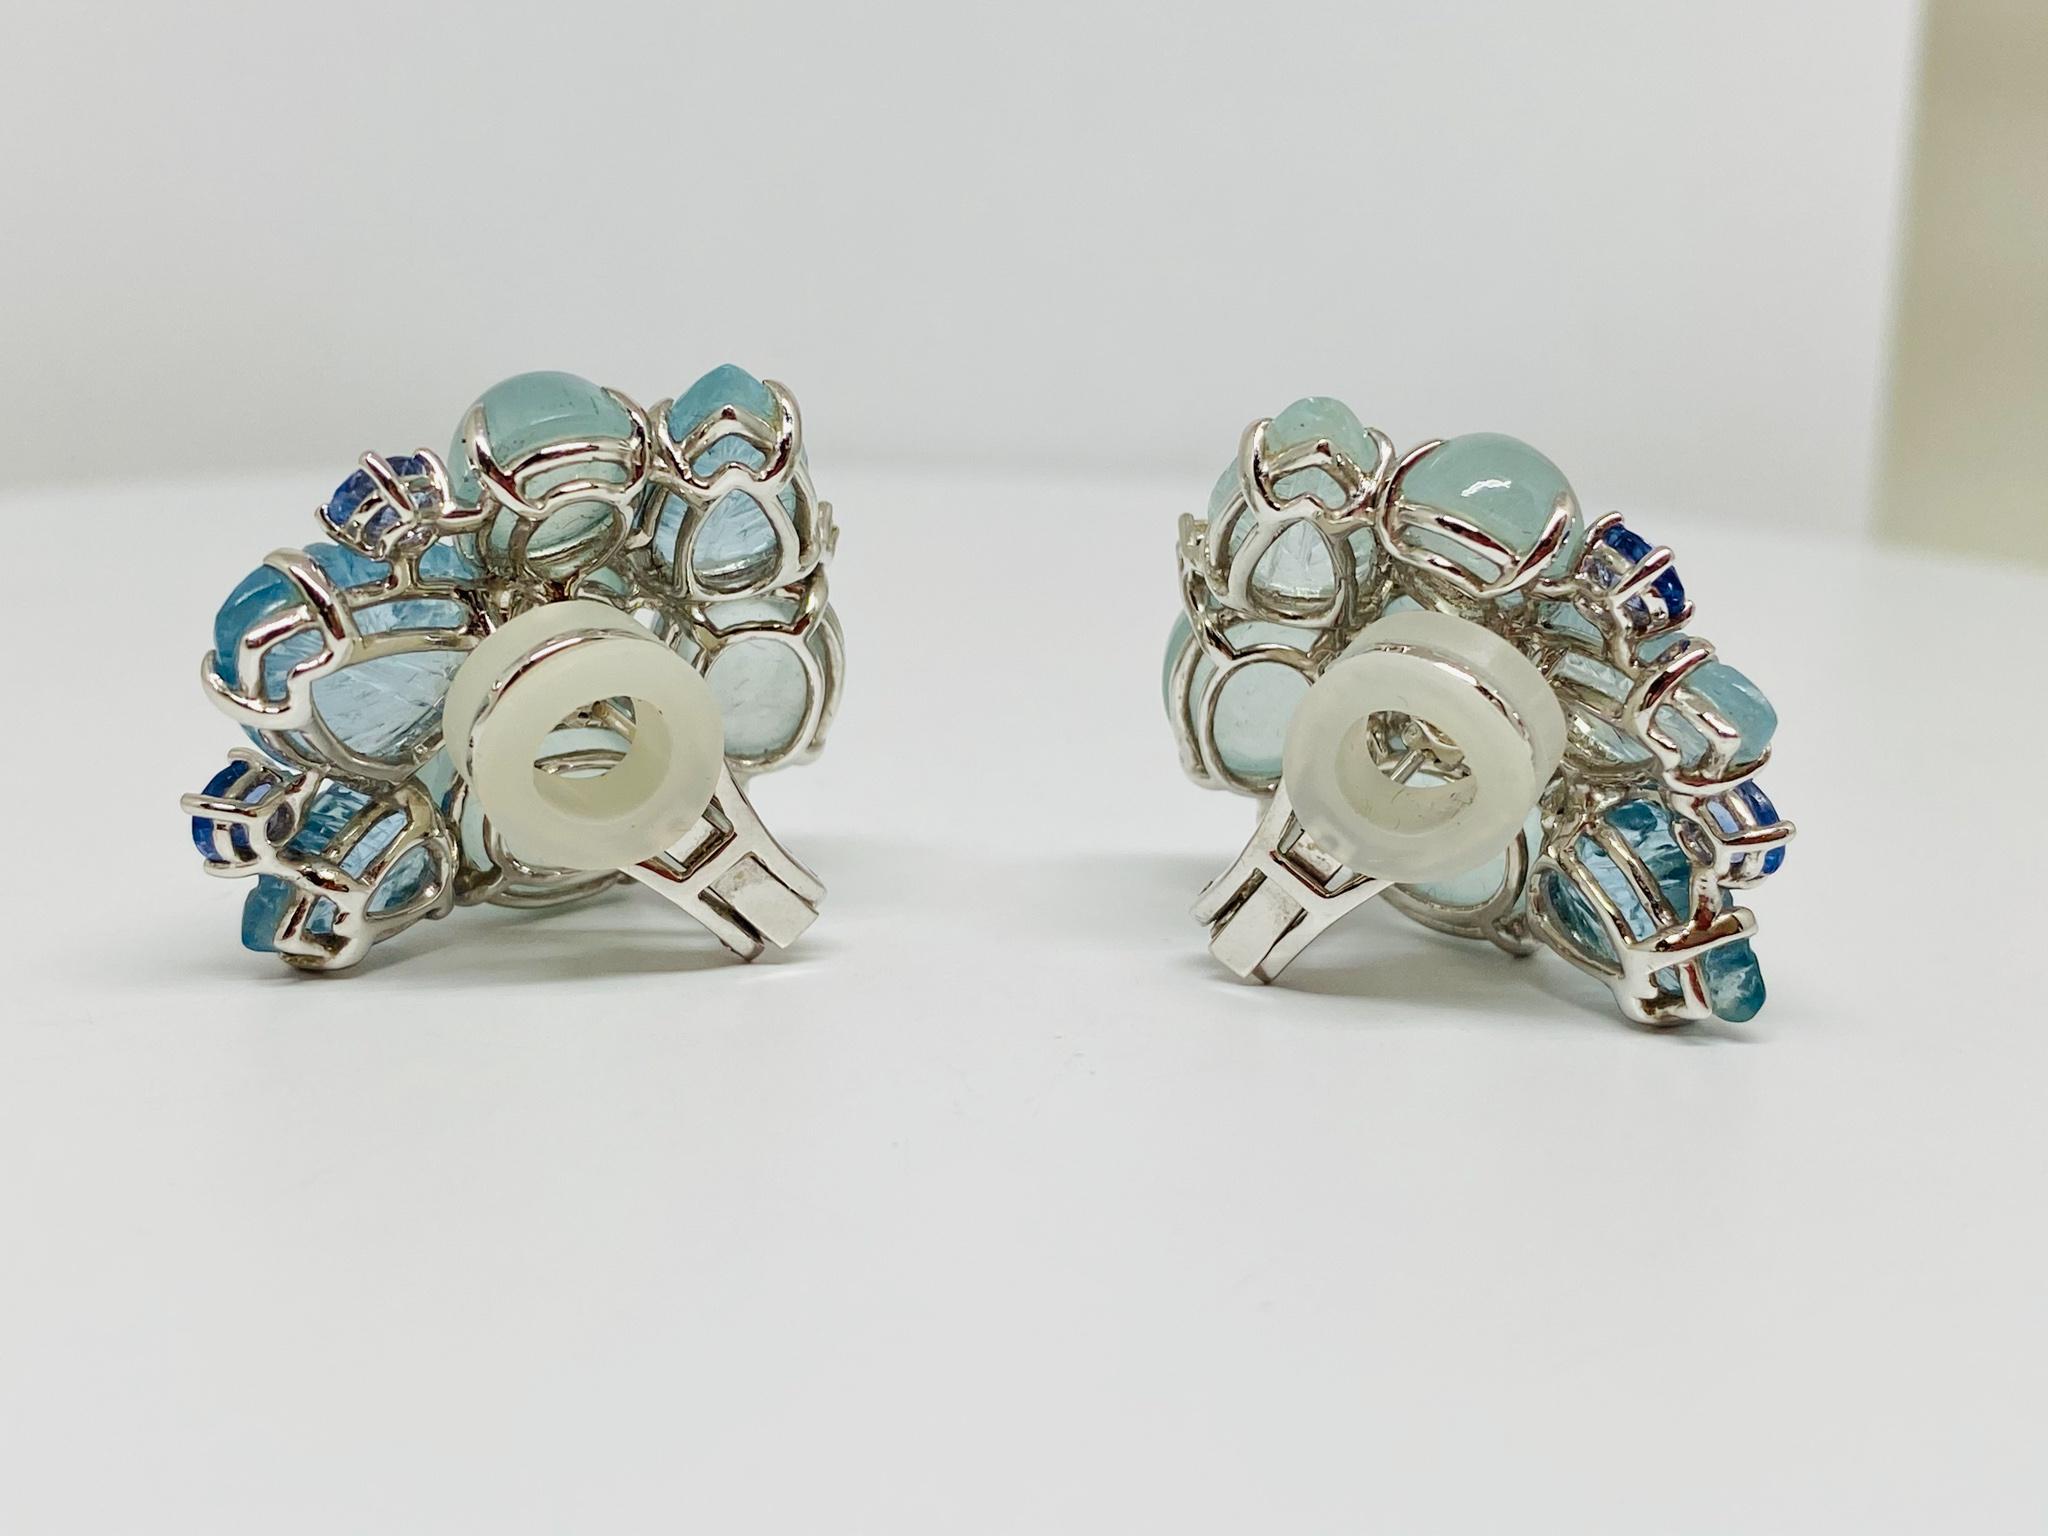 Superbly designed beaded clip-on earrings in 18KT white gold featuring an array of oval cut and leaf shaped cabochon aquamarines with a total weight of 46.15 carats all accented by round and oval cut blue and white sapphires weighing a total of 